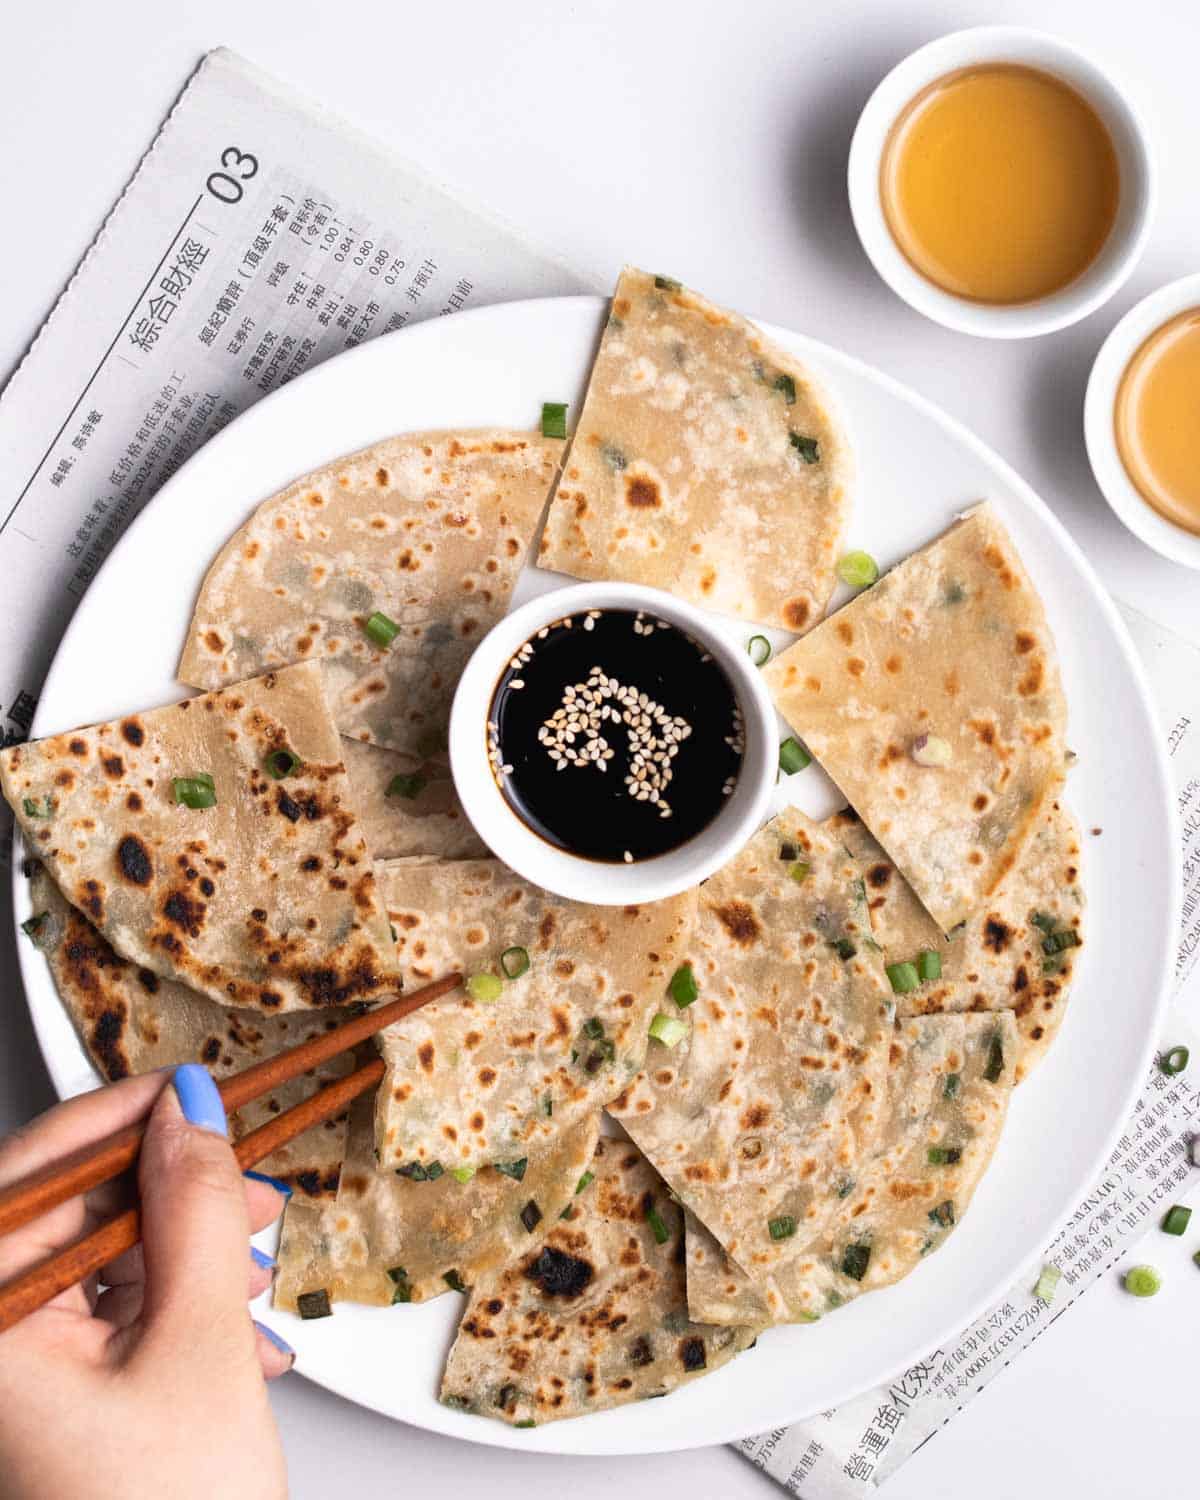 A plate of scallion pancake pieces served with soy sauce.